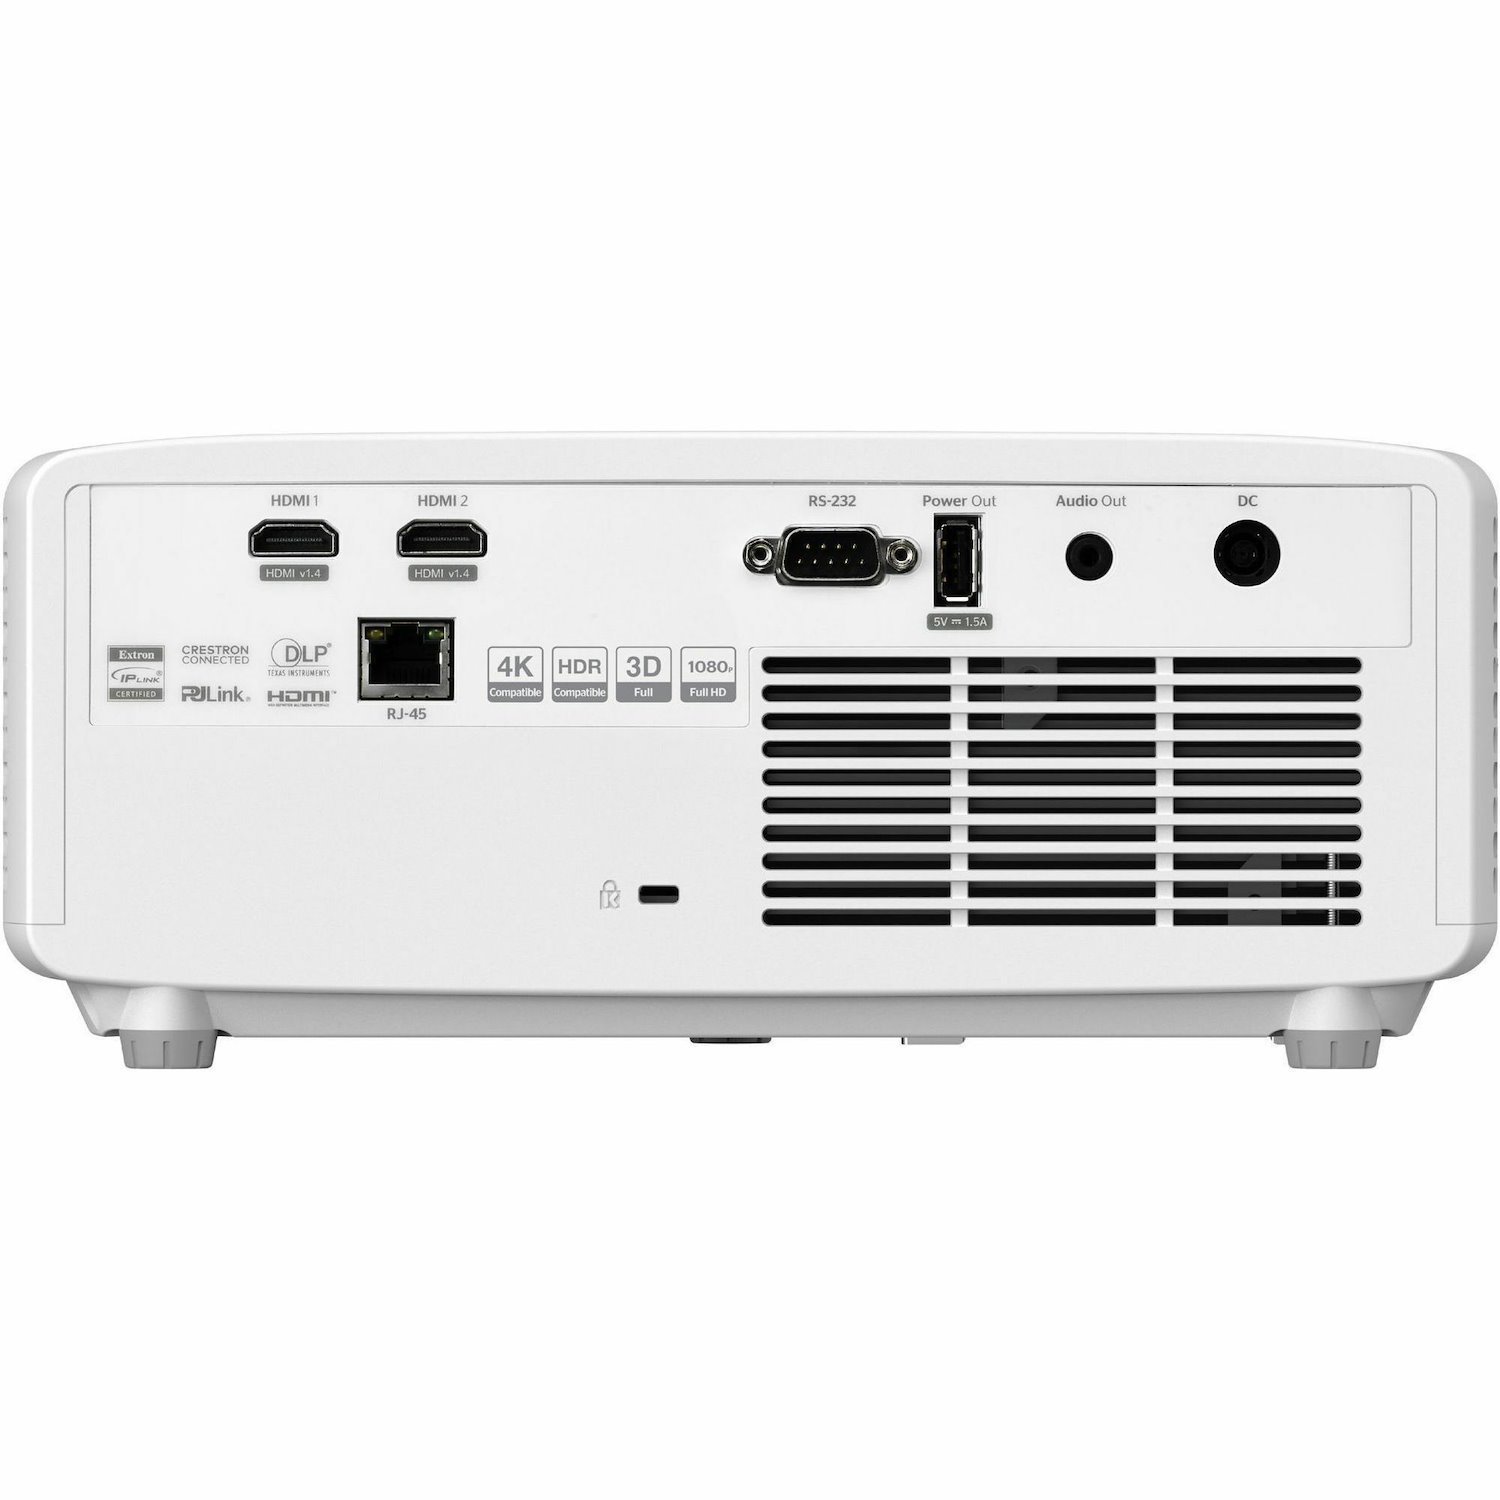 Optoma GT2100HDR 3D Short Throw DLP Projector - 16:9 - White